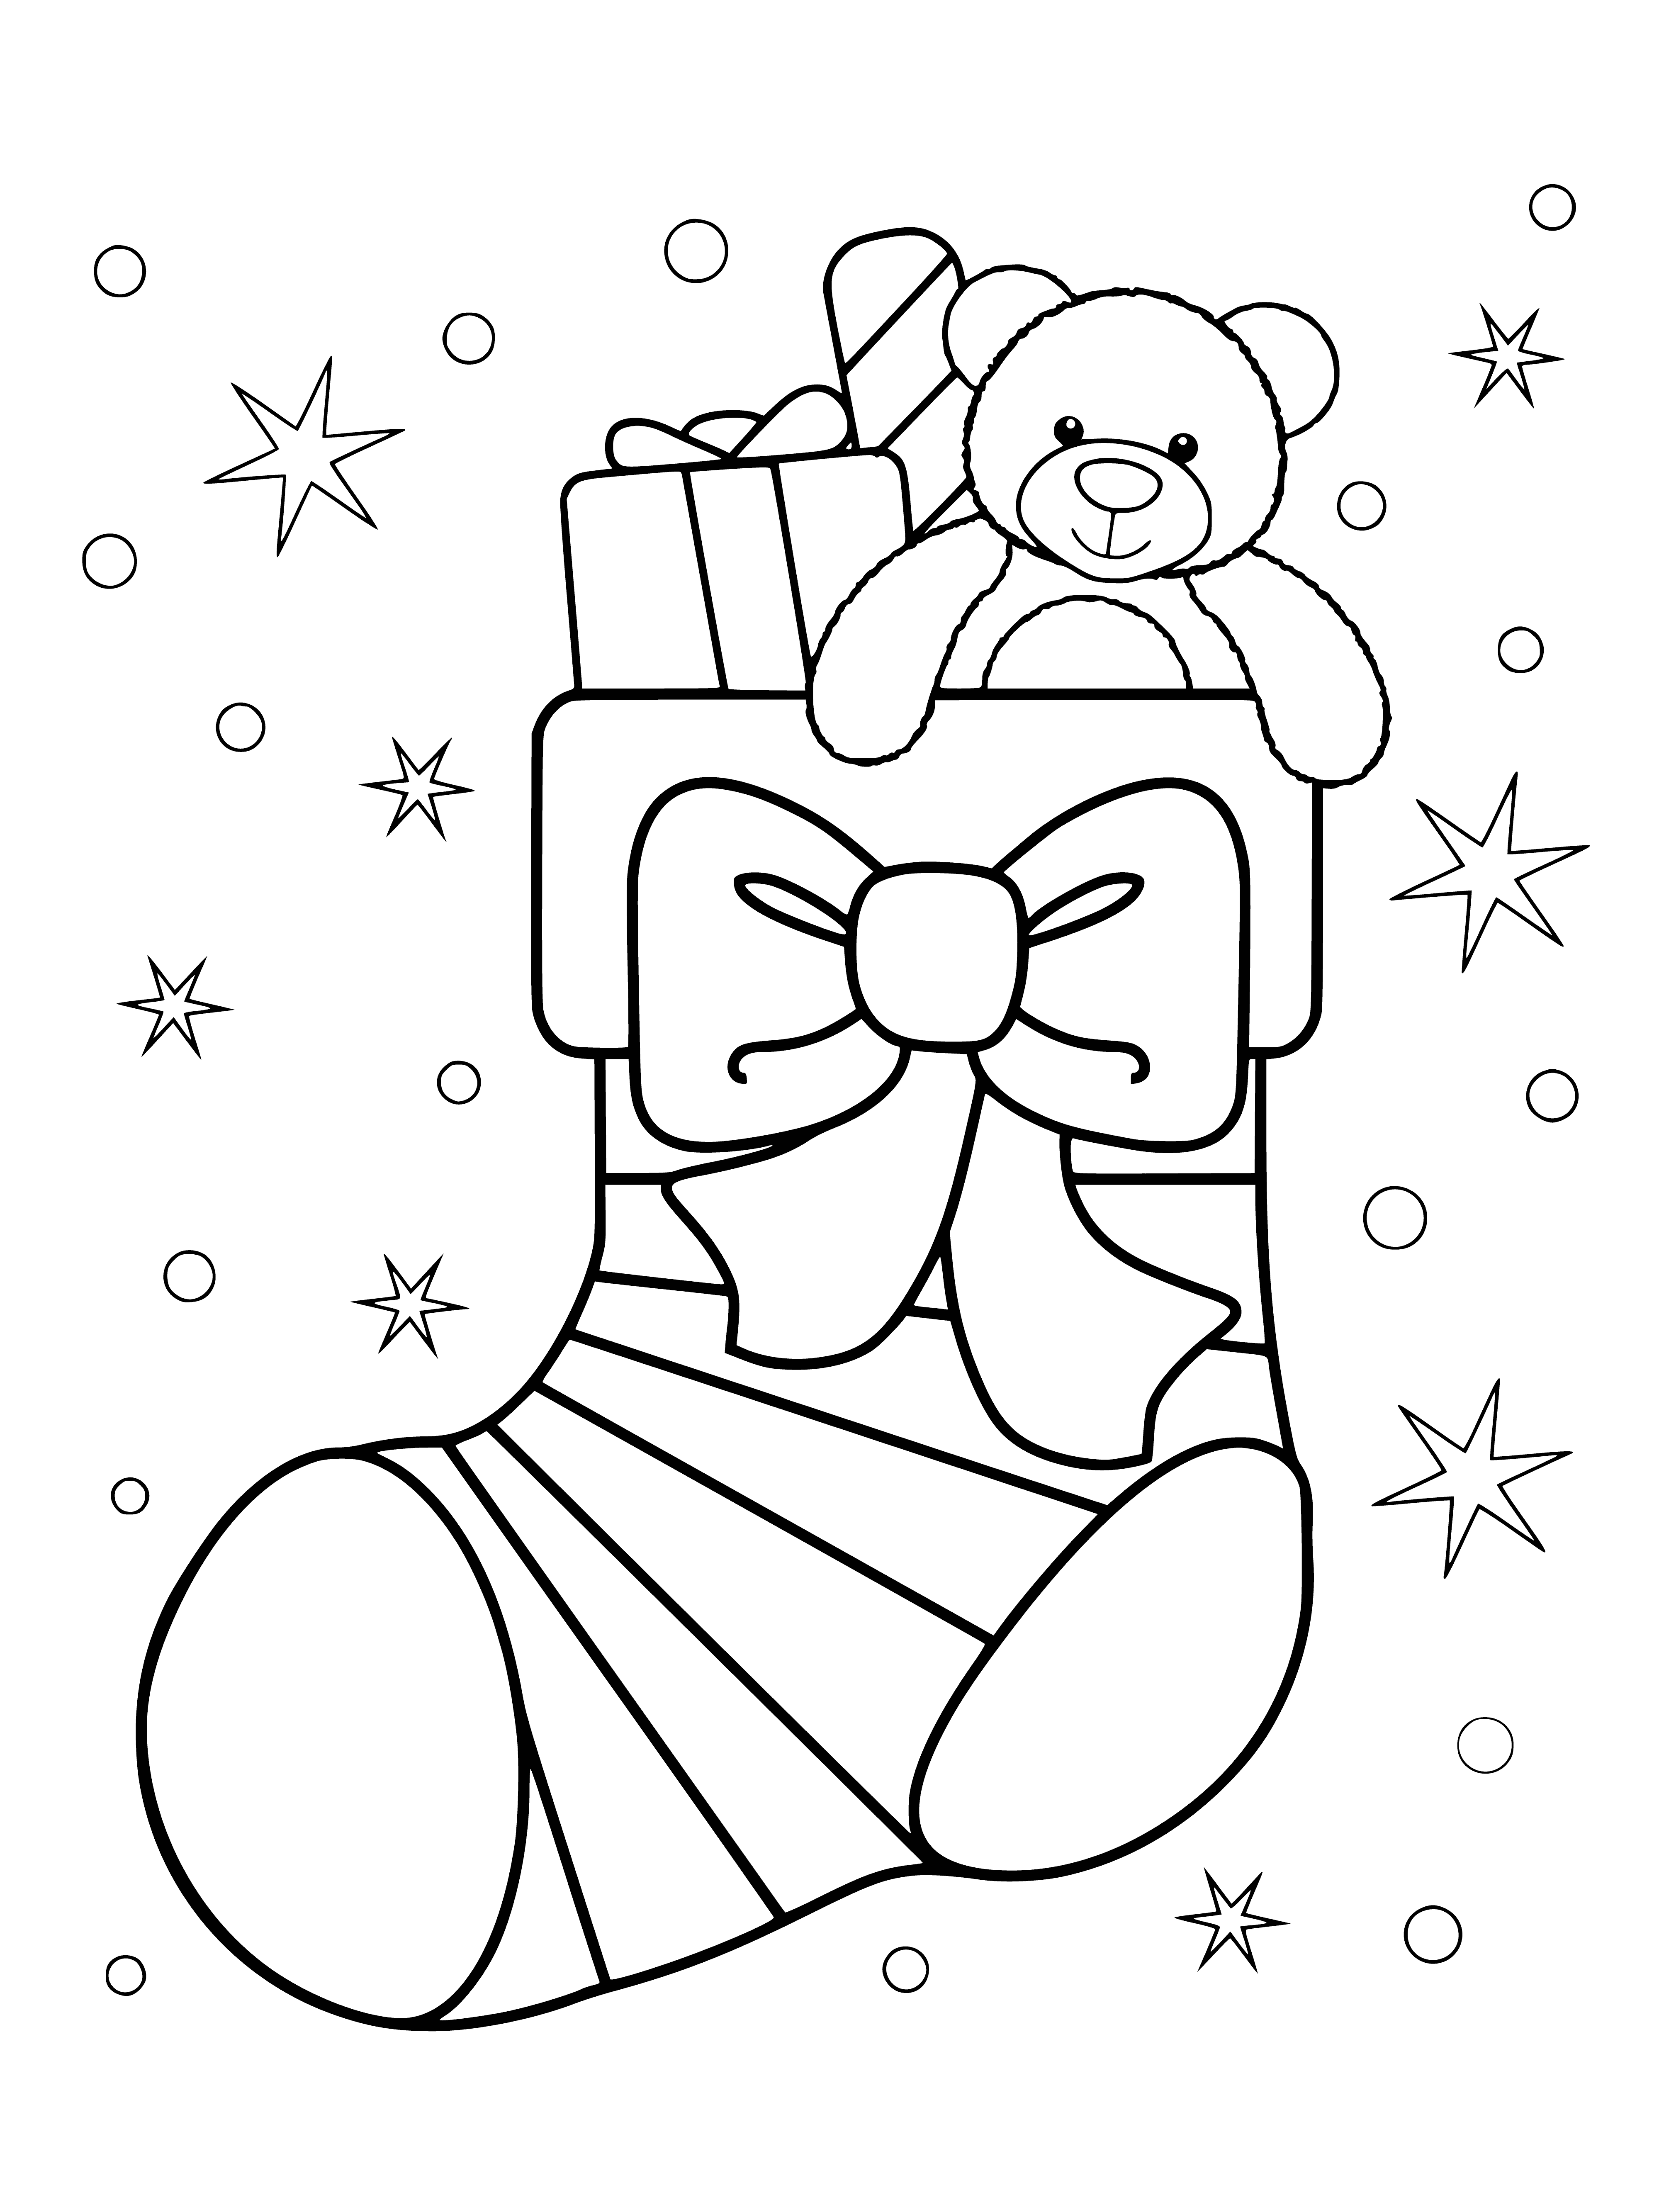 coloring page: They represent the joy of the holiday season and the spirit of giving. -> Cute red & green Xmas socks feature presents w/ bows, capturing joy & spirit of giving!